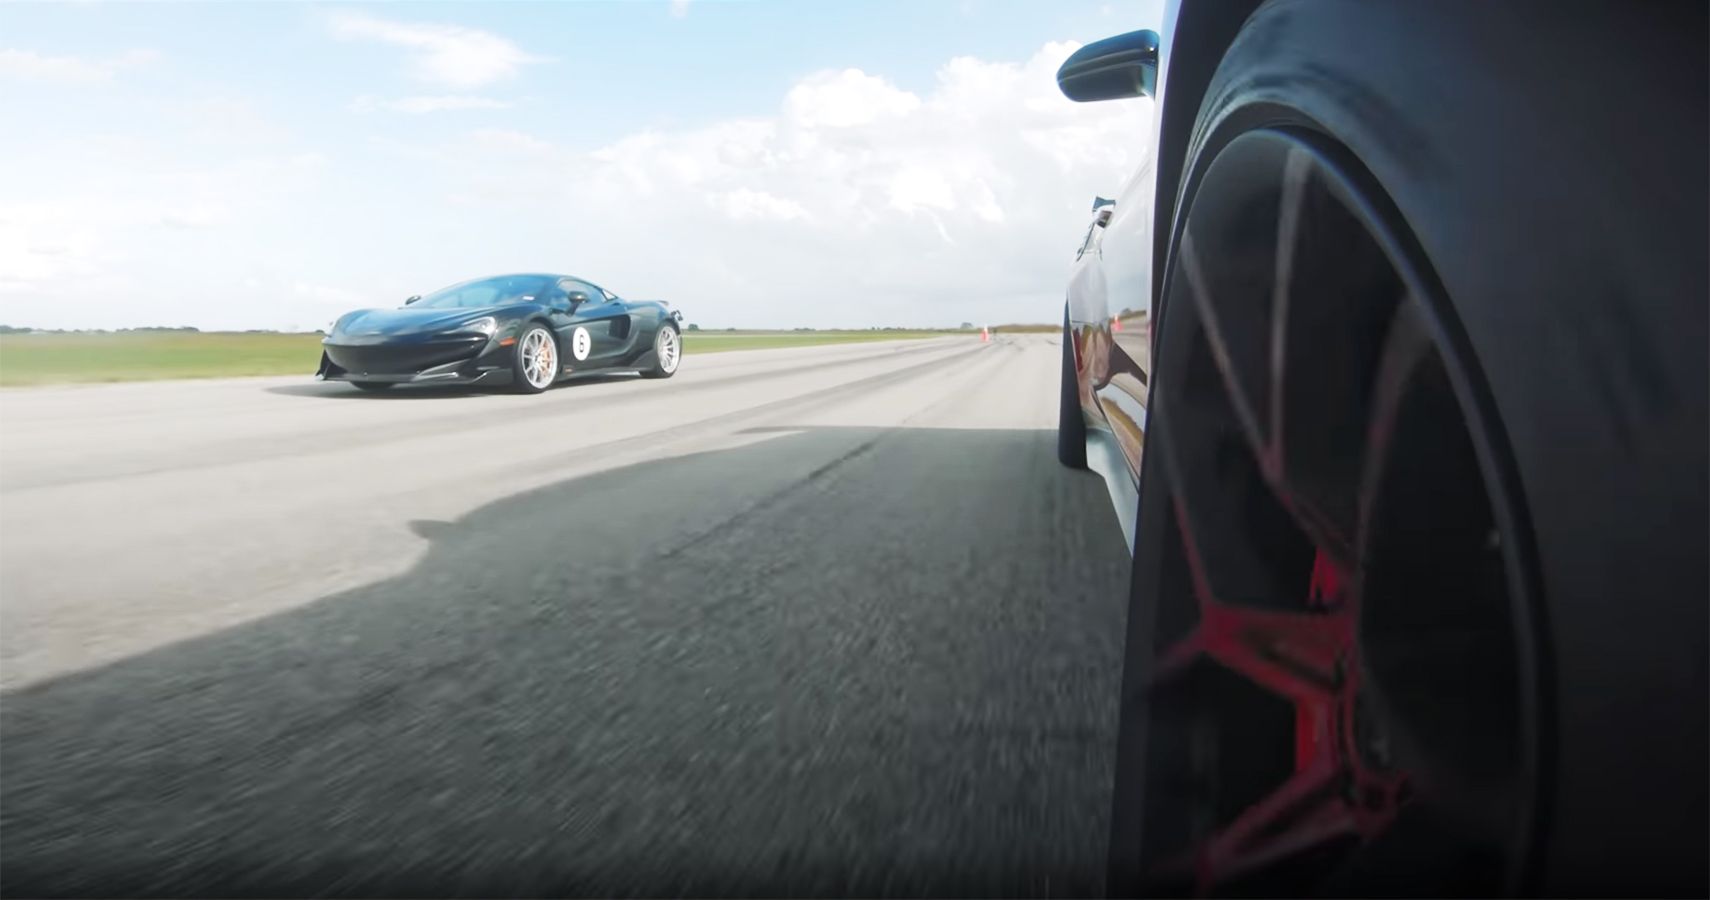 Watch The Hennessey Exorcist Leave A Tuned McLaren 600LT In The Dust